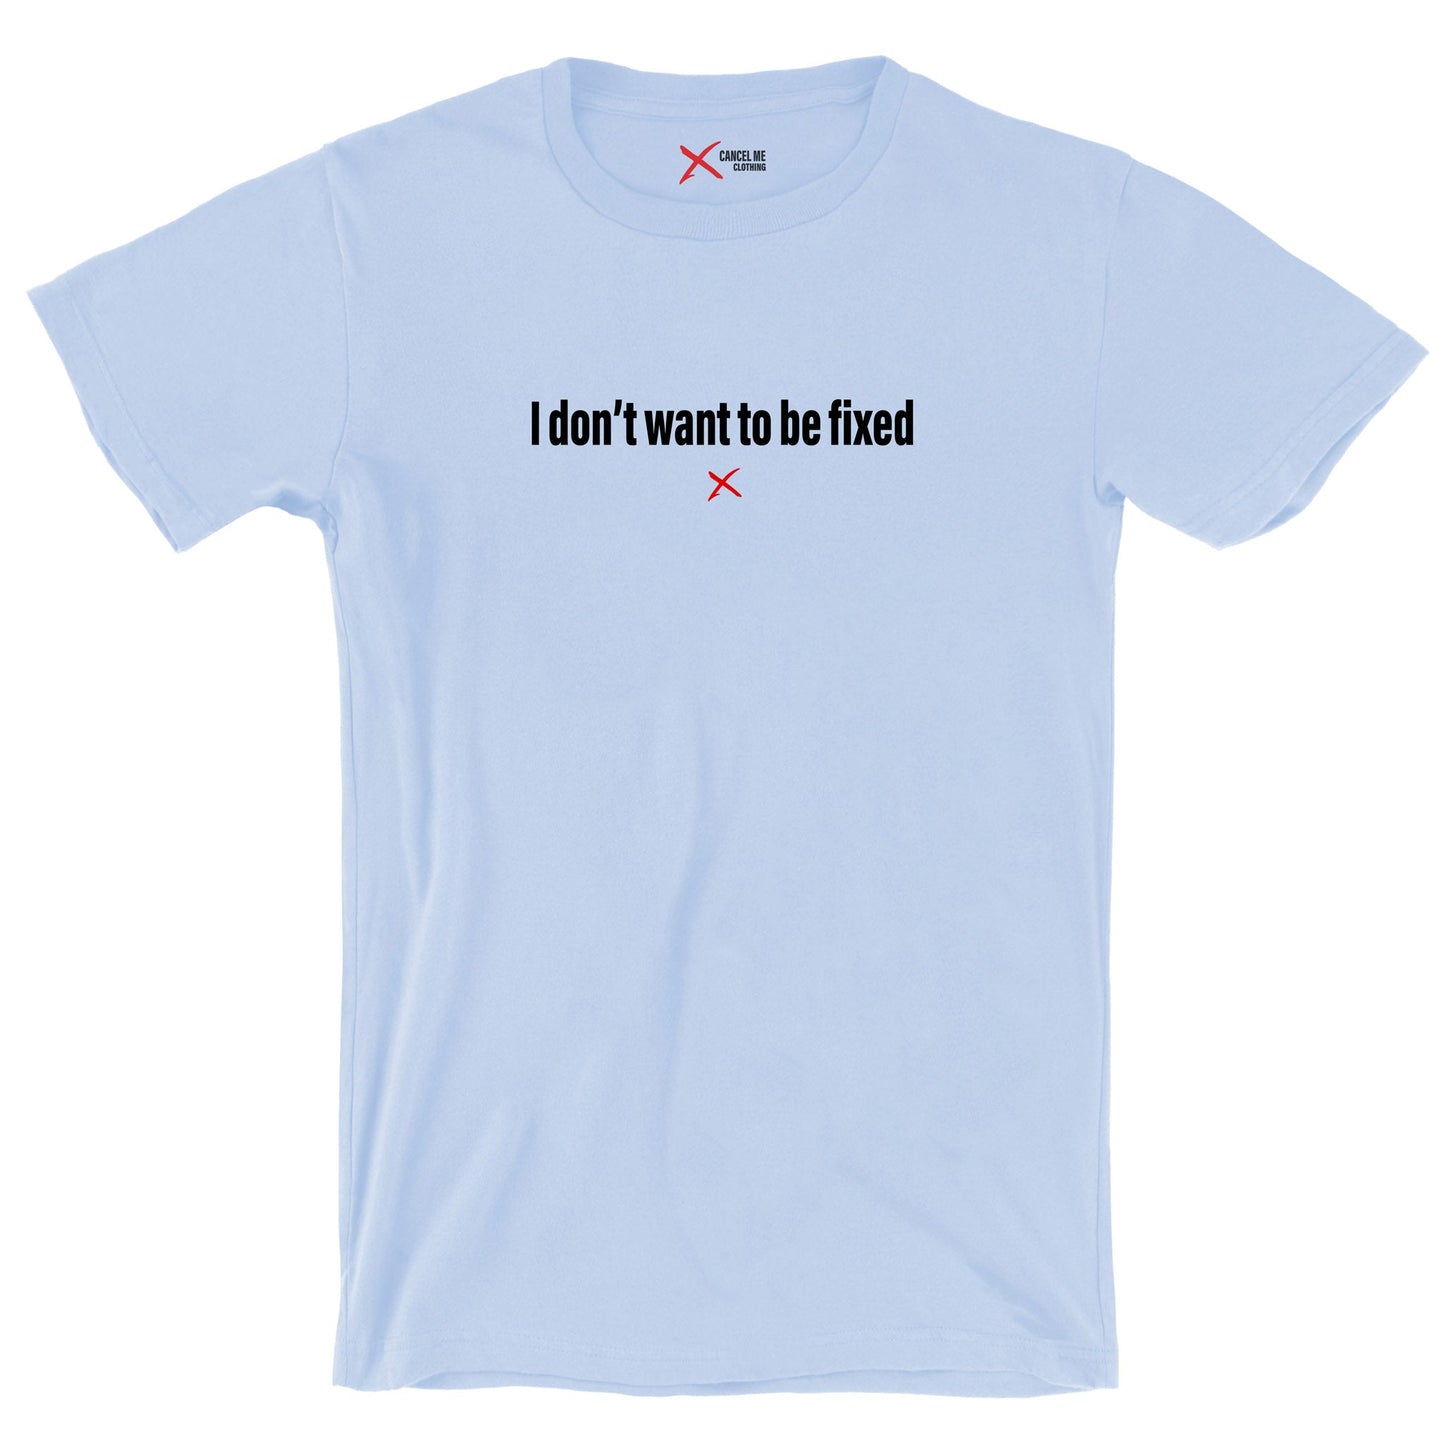 I don't want to be fixed - Shirt